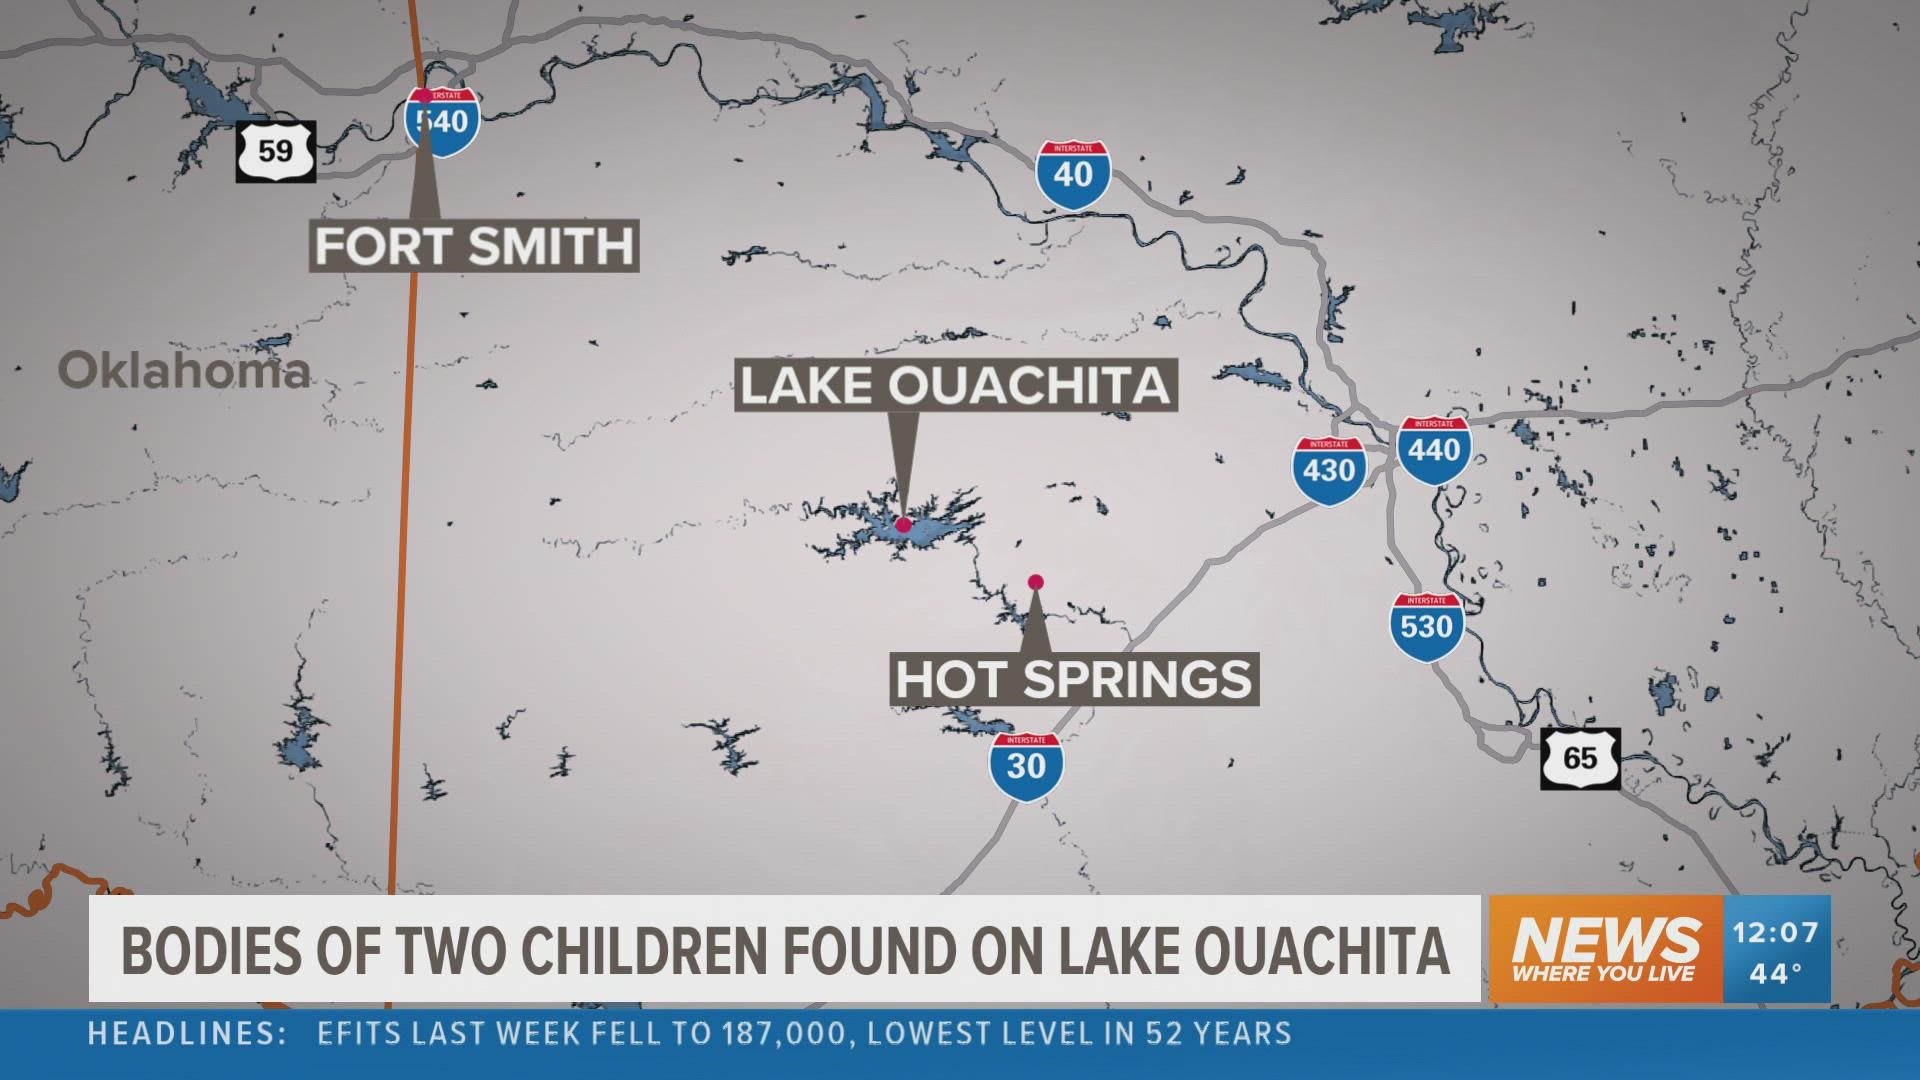 The bodies of two children were found after a boating accident on Lake Ouachita Wednesday night. Officials say they are searching for one more person.